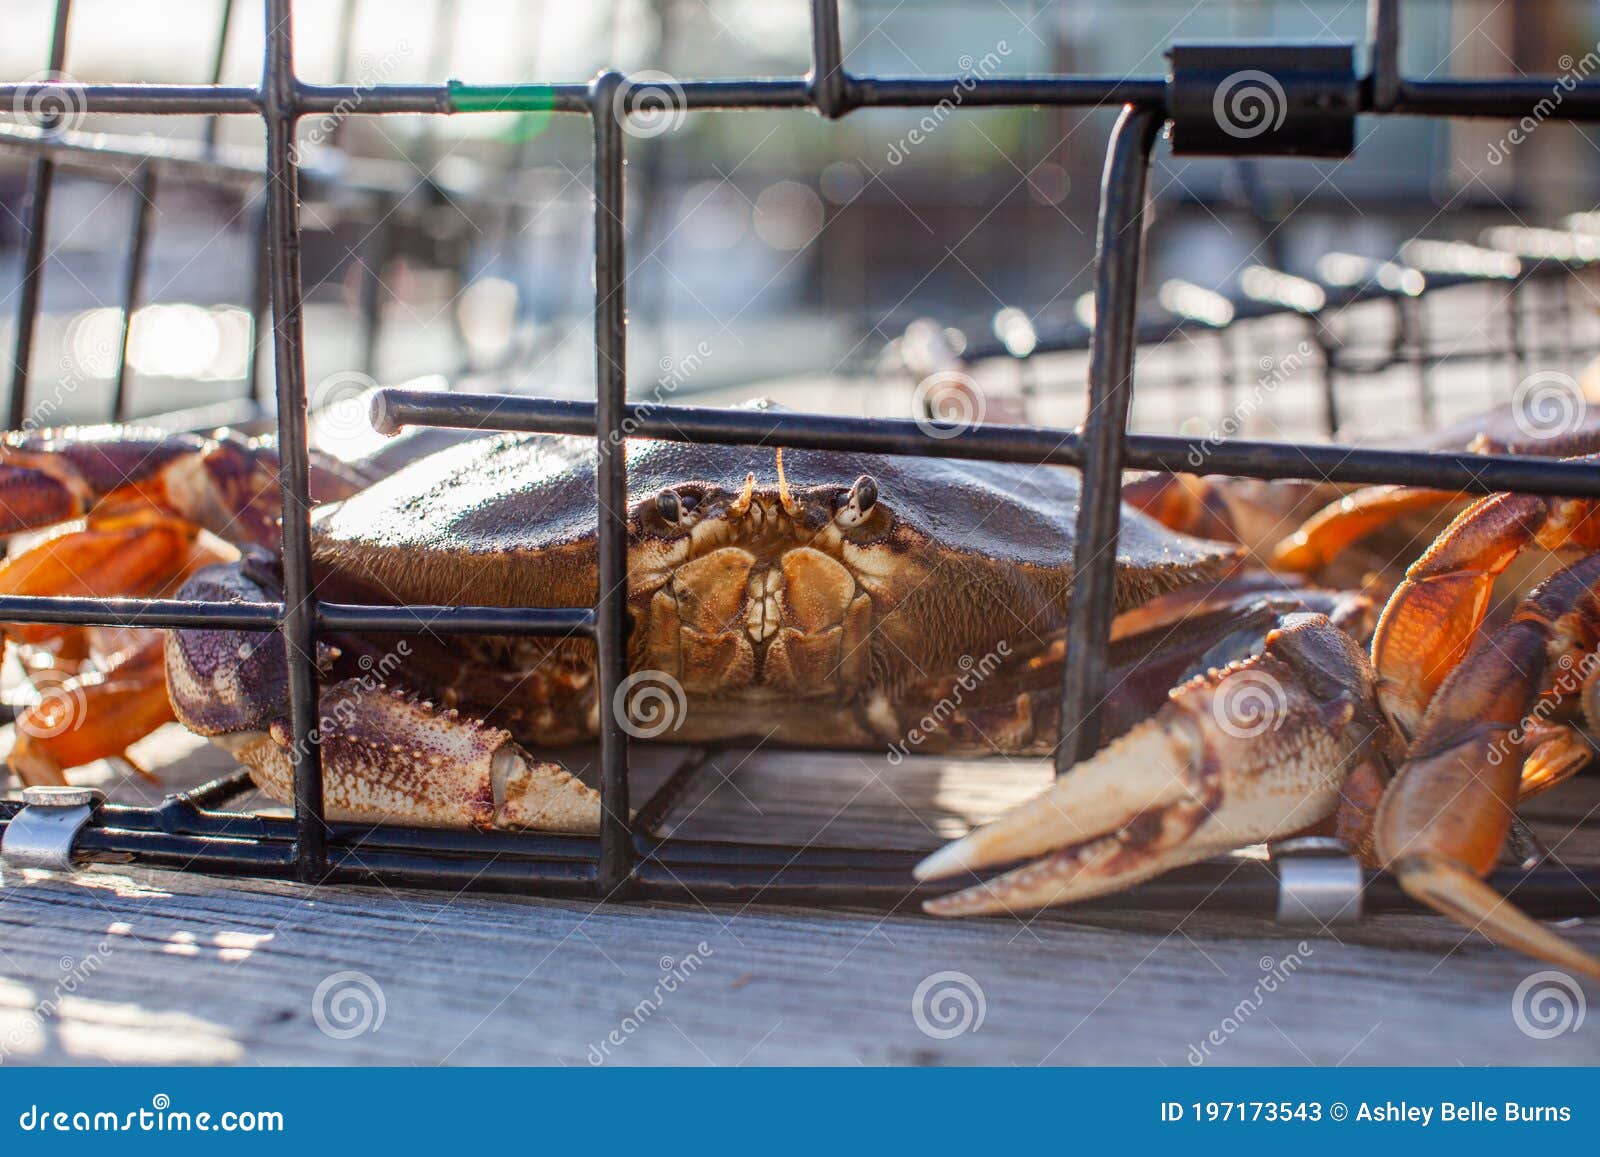 a male dungeness crabs in a crab trap sitting on a dock